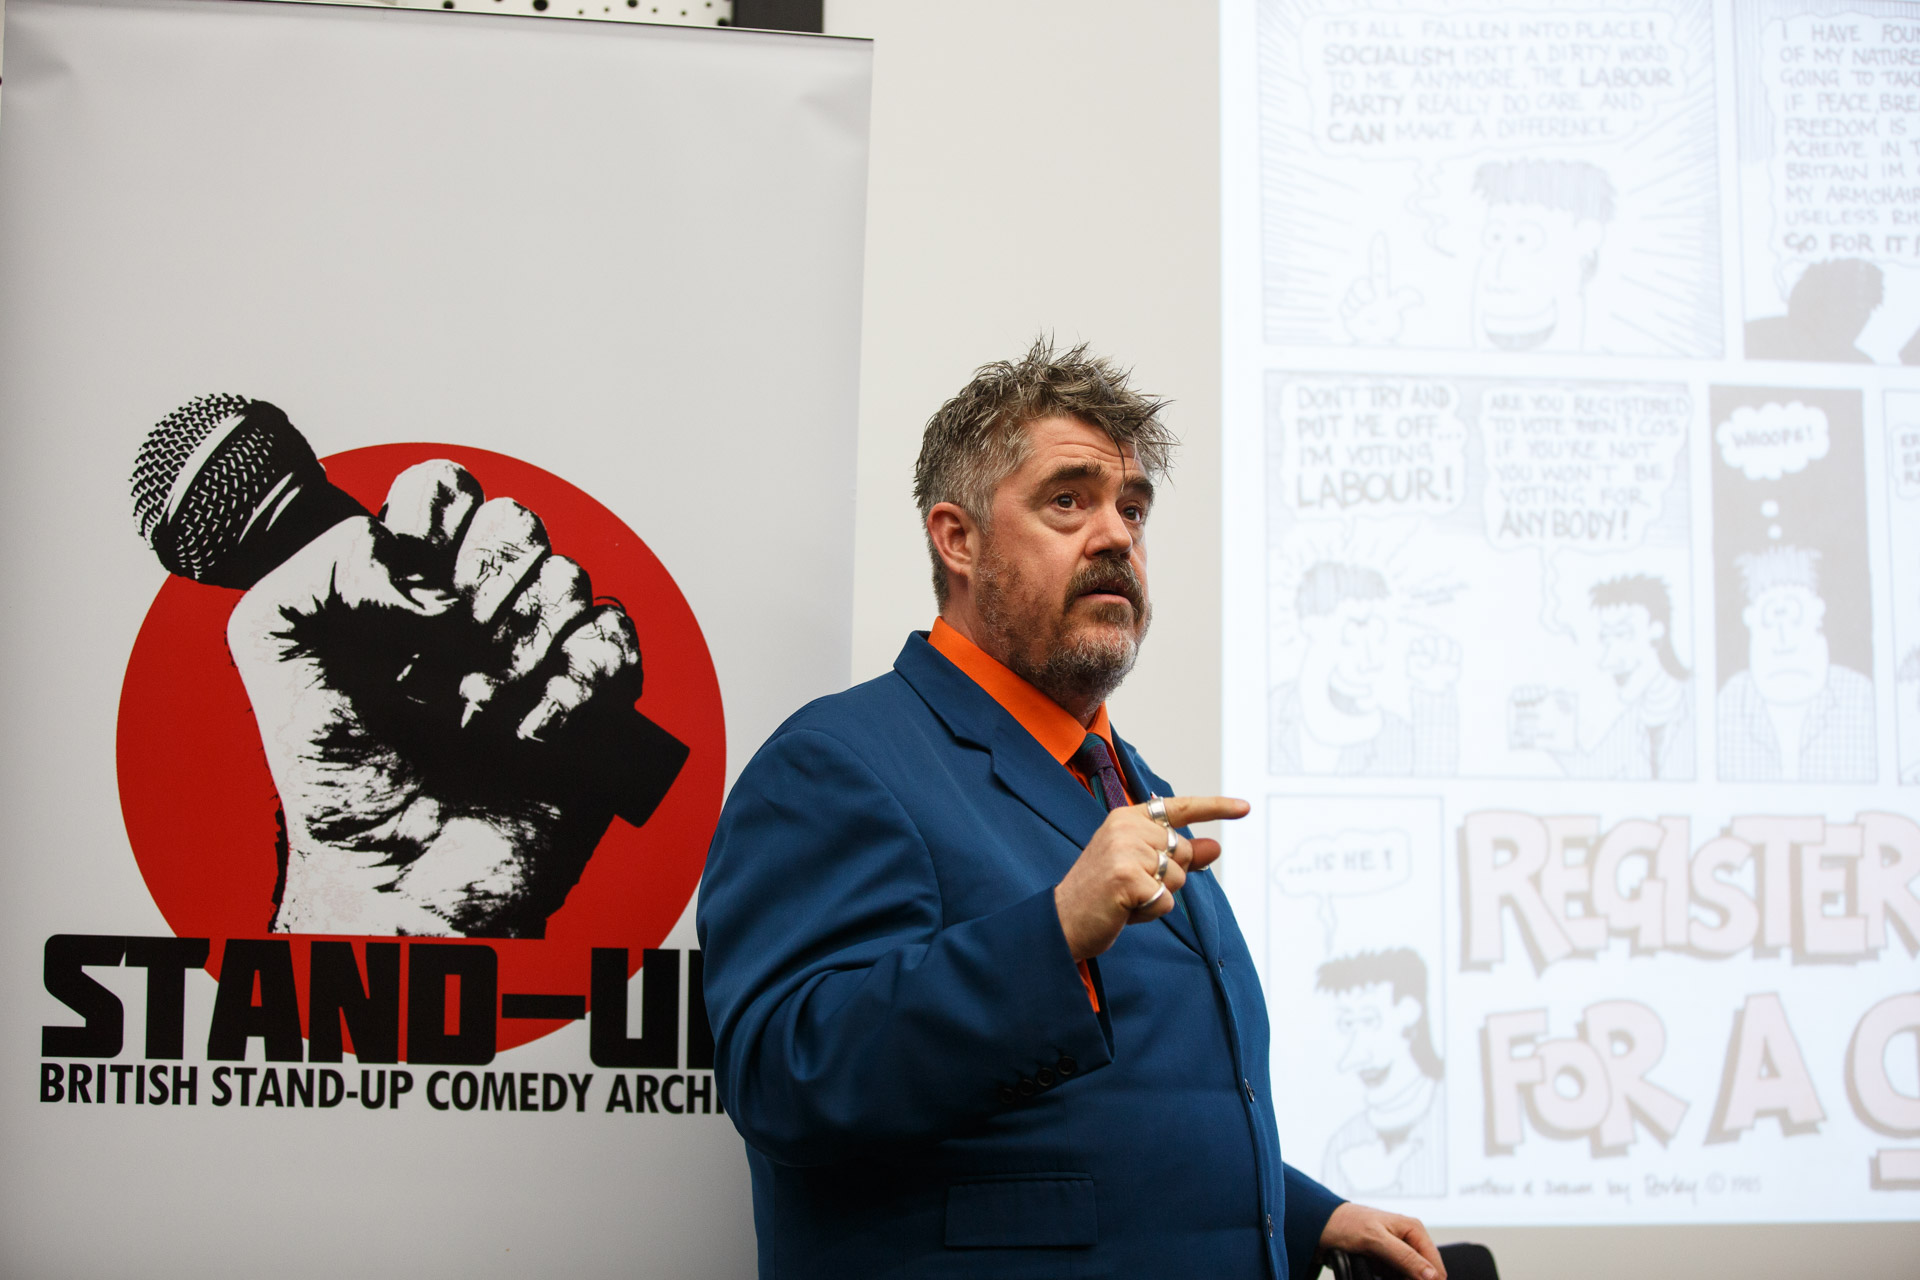 Phill Jupitus talking about a Red Wedge Comedy leaflet which he cartooned for (as Porky the Poet). Photo Matt Wilson